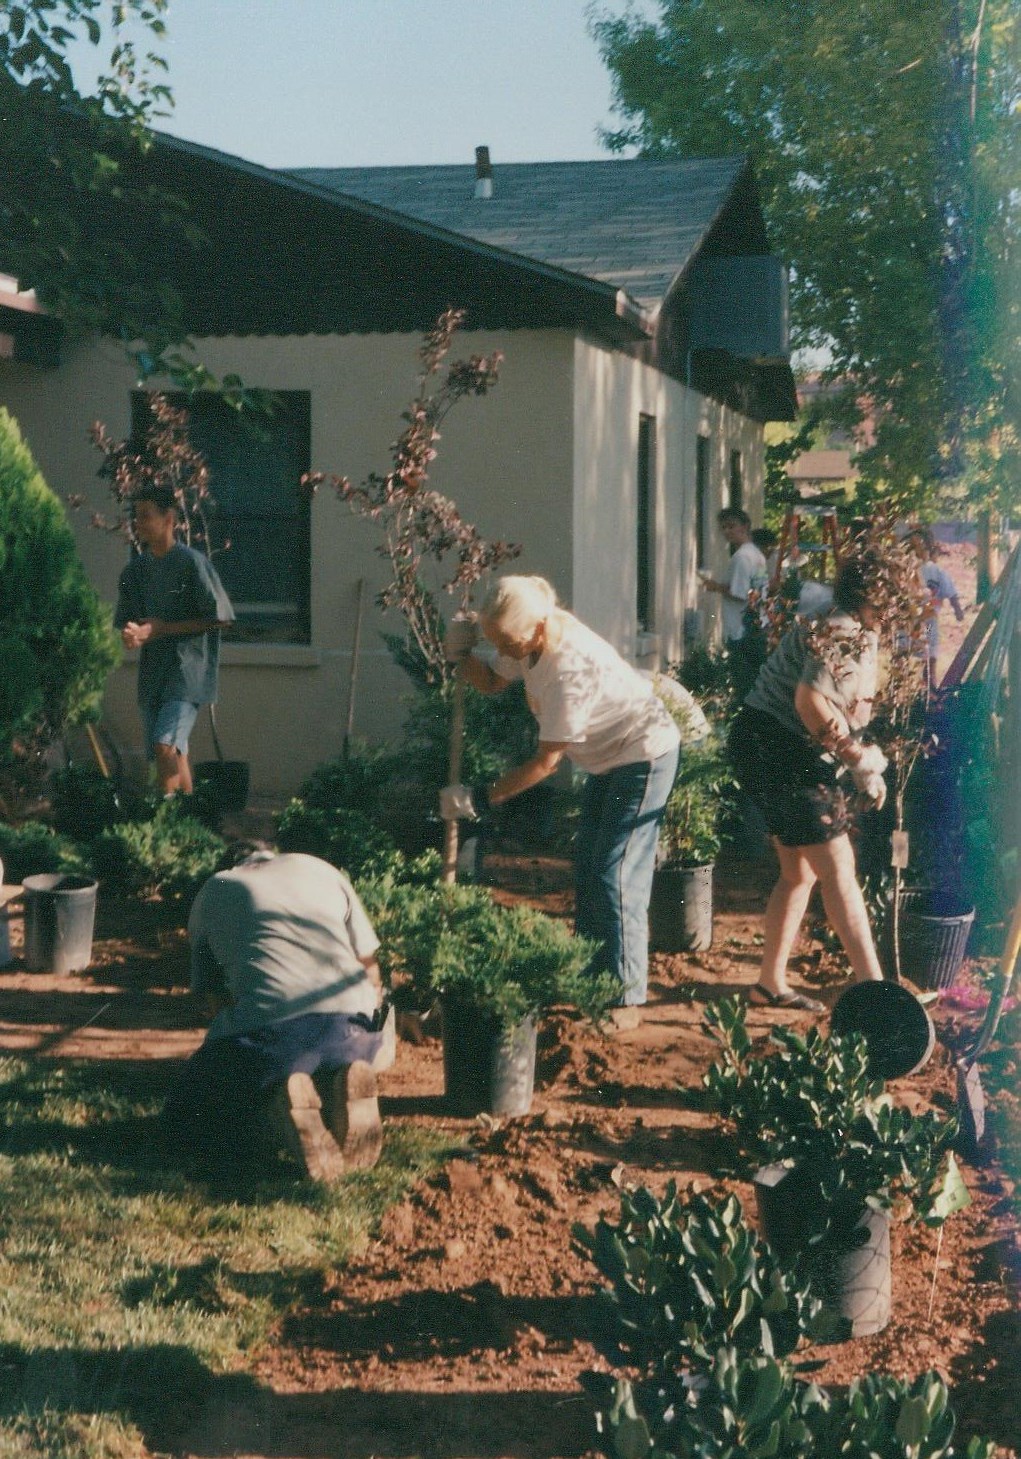 People putting in plants in front of the original Washington County Children's Justice Center